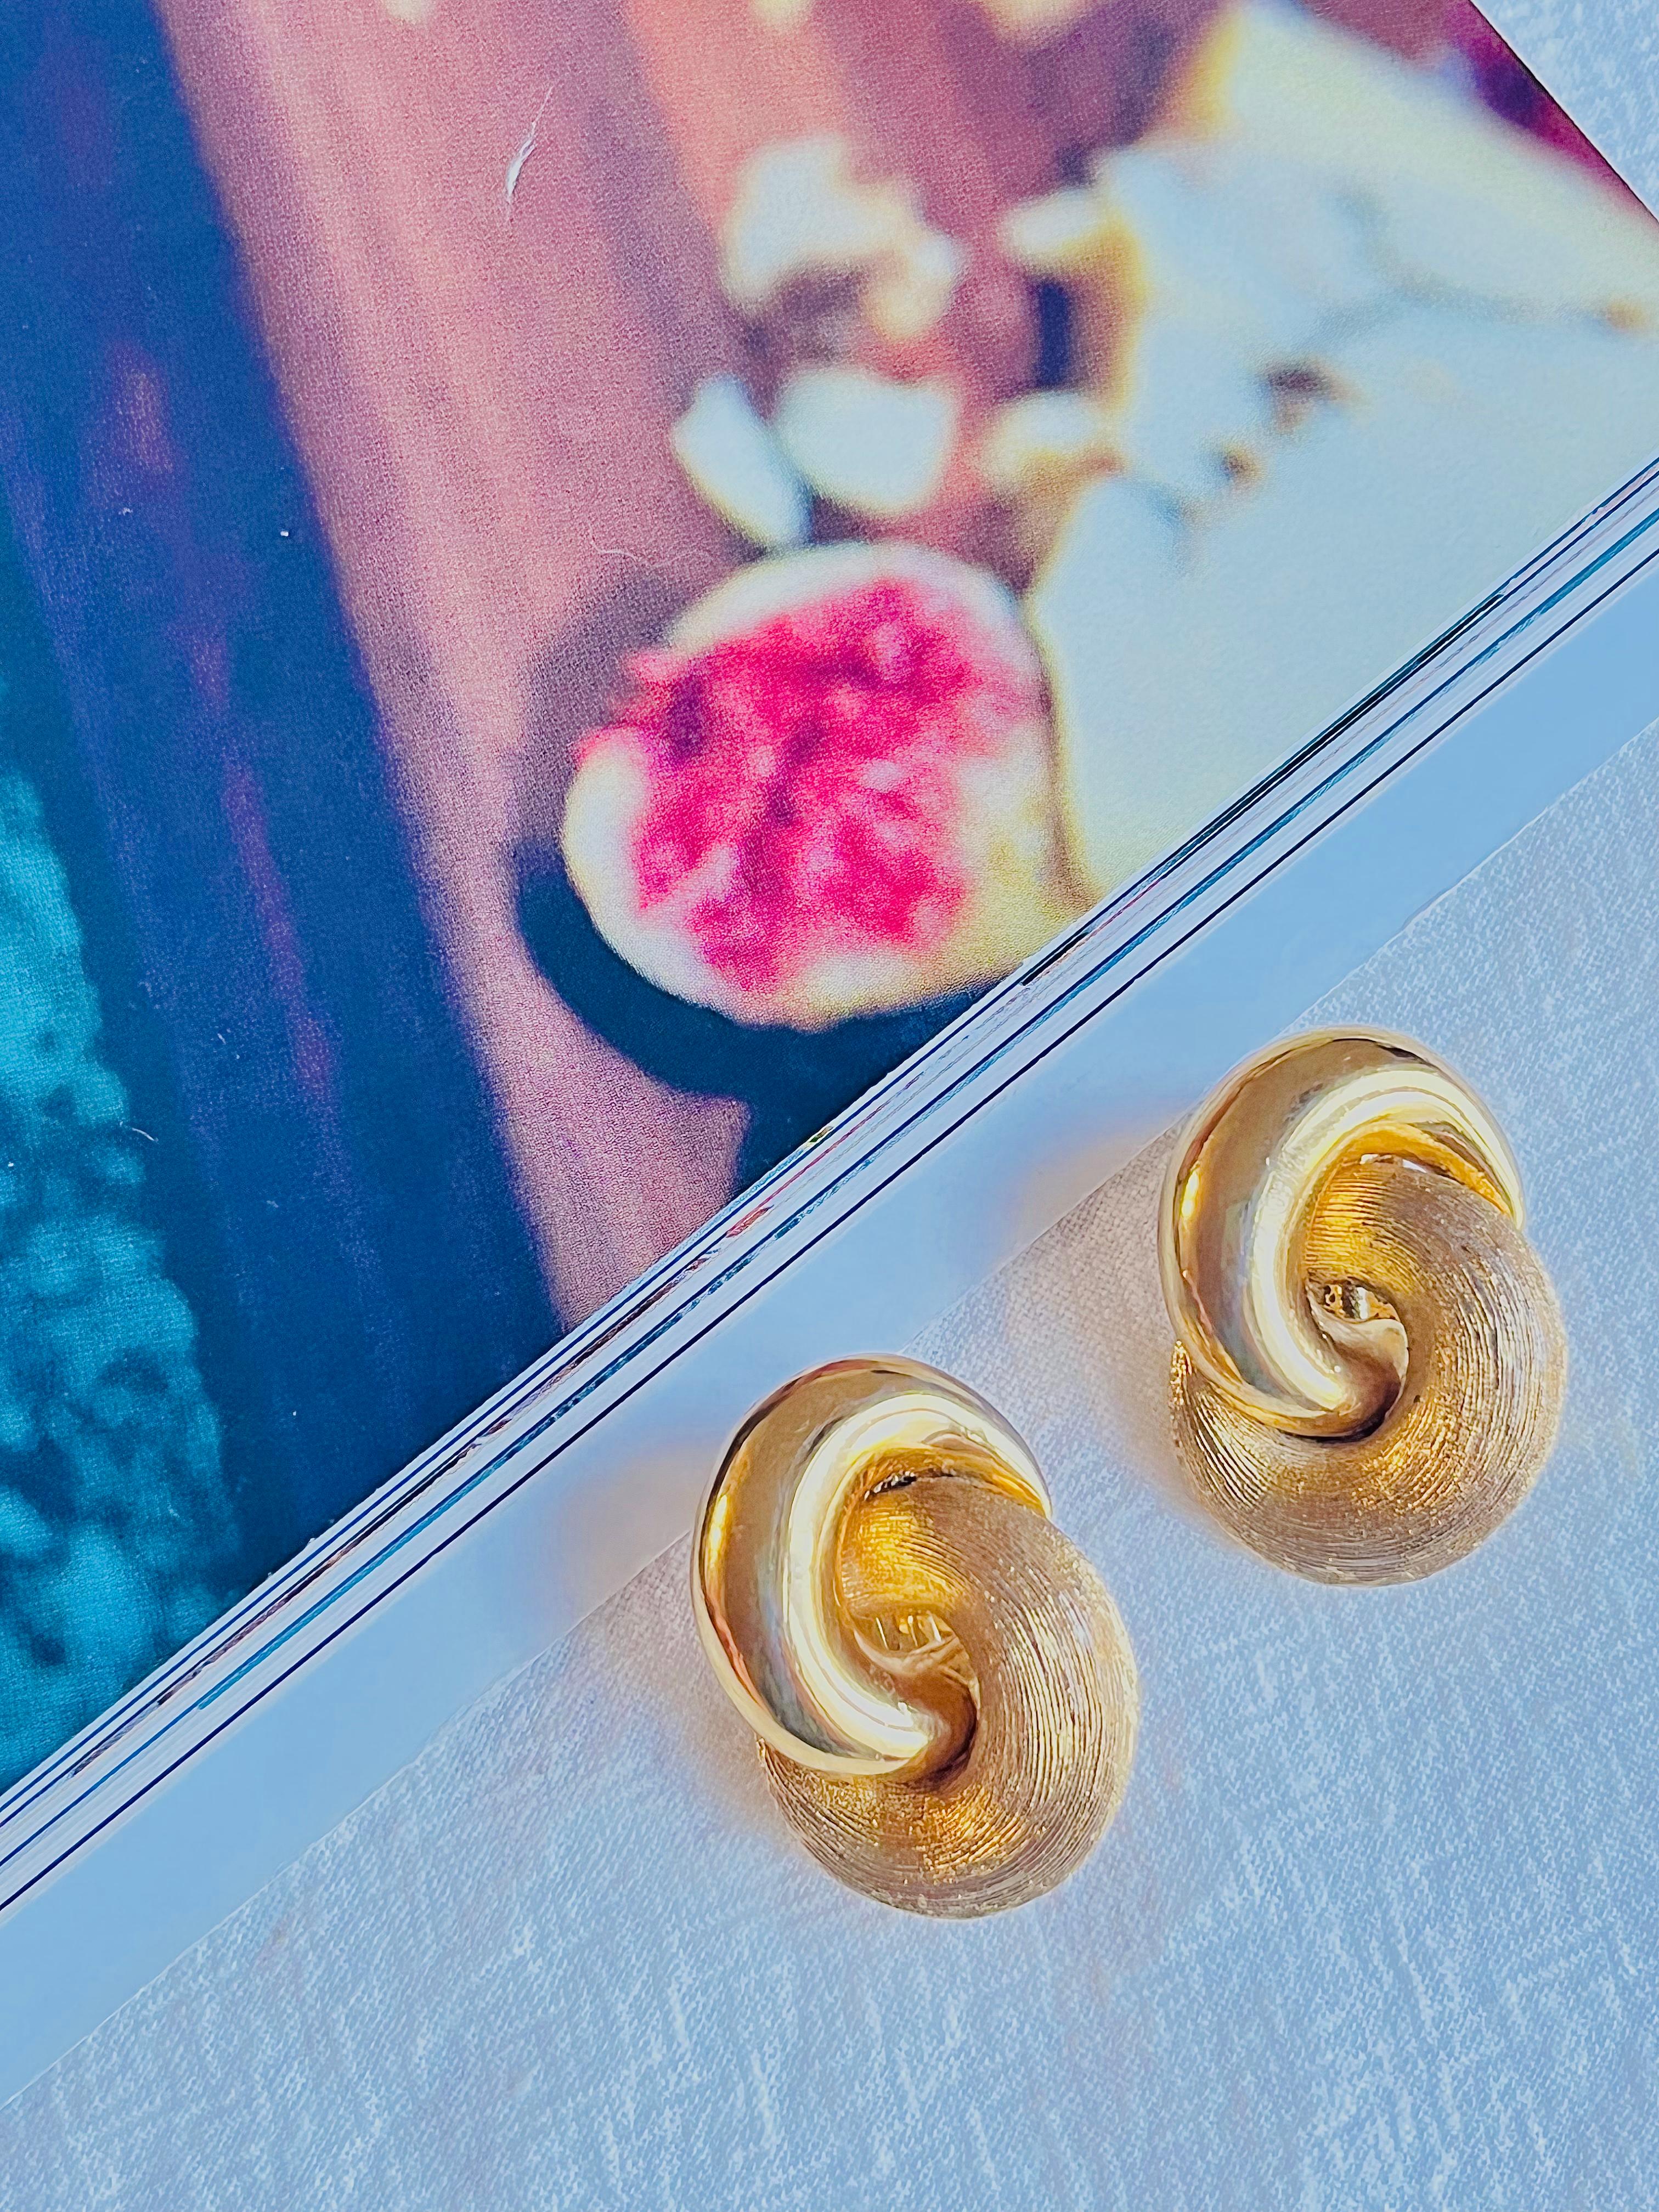 Christian Dior Vintage 1980s Large Interlock Knot Matte Glow Clip Earrings, Gold Tone

Very good condition. Some colour loss and scratches at back. 100% Genuine.

A very beautiful pair of earrings by Chr. DIOR, signed at the back.

Size: 3.0*2.1